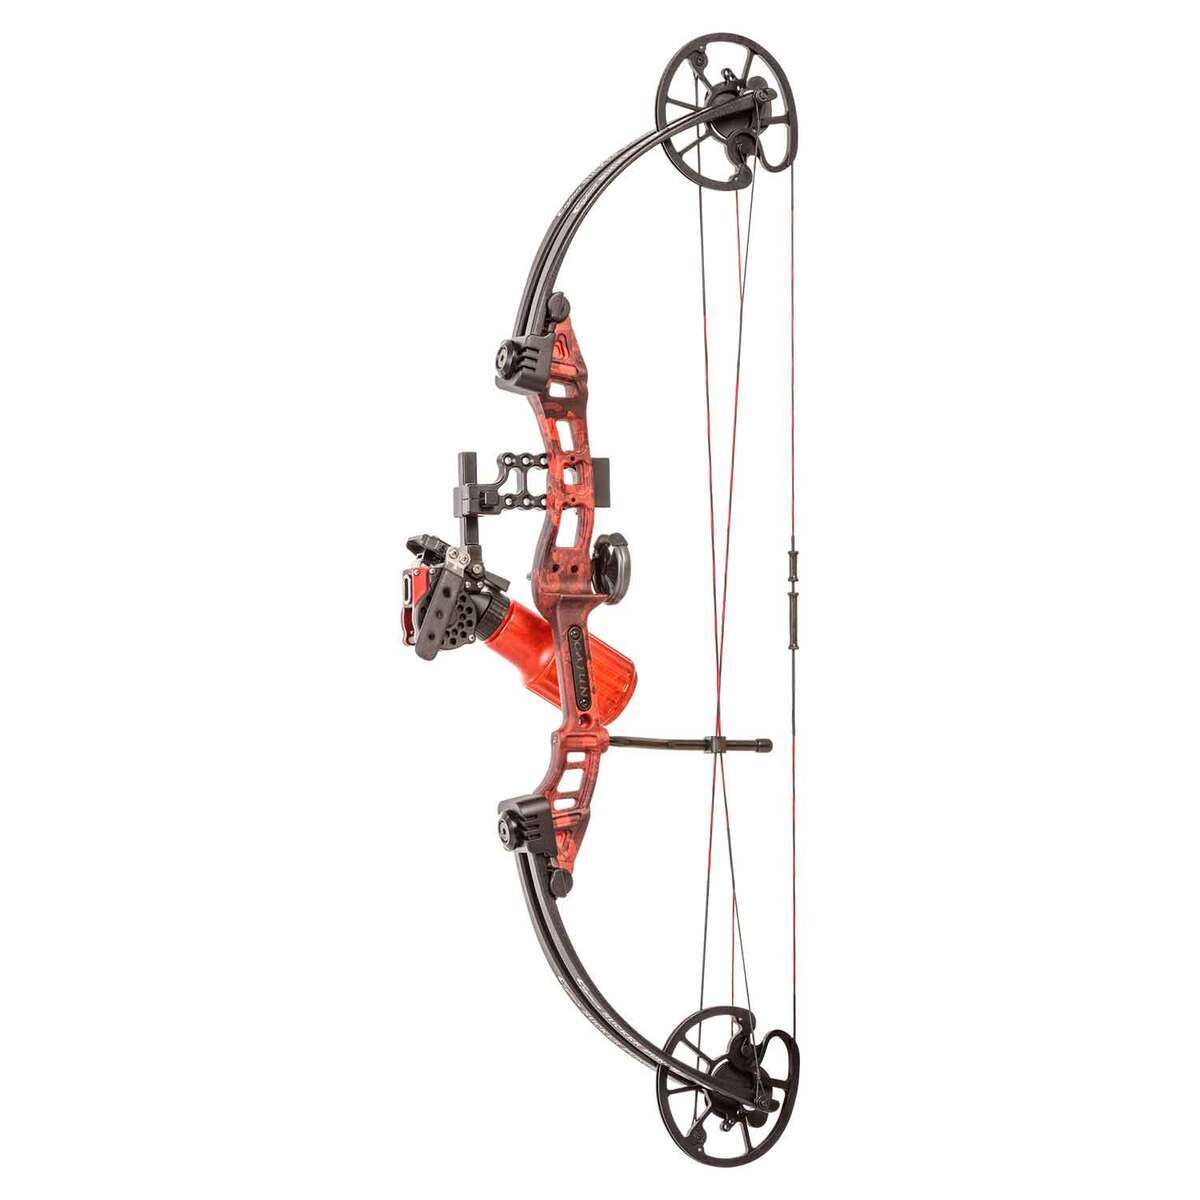 PSE Kingfisher Bowfishing Recurve Bow Package Right Hand 45 lb 30 Draw